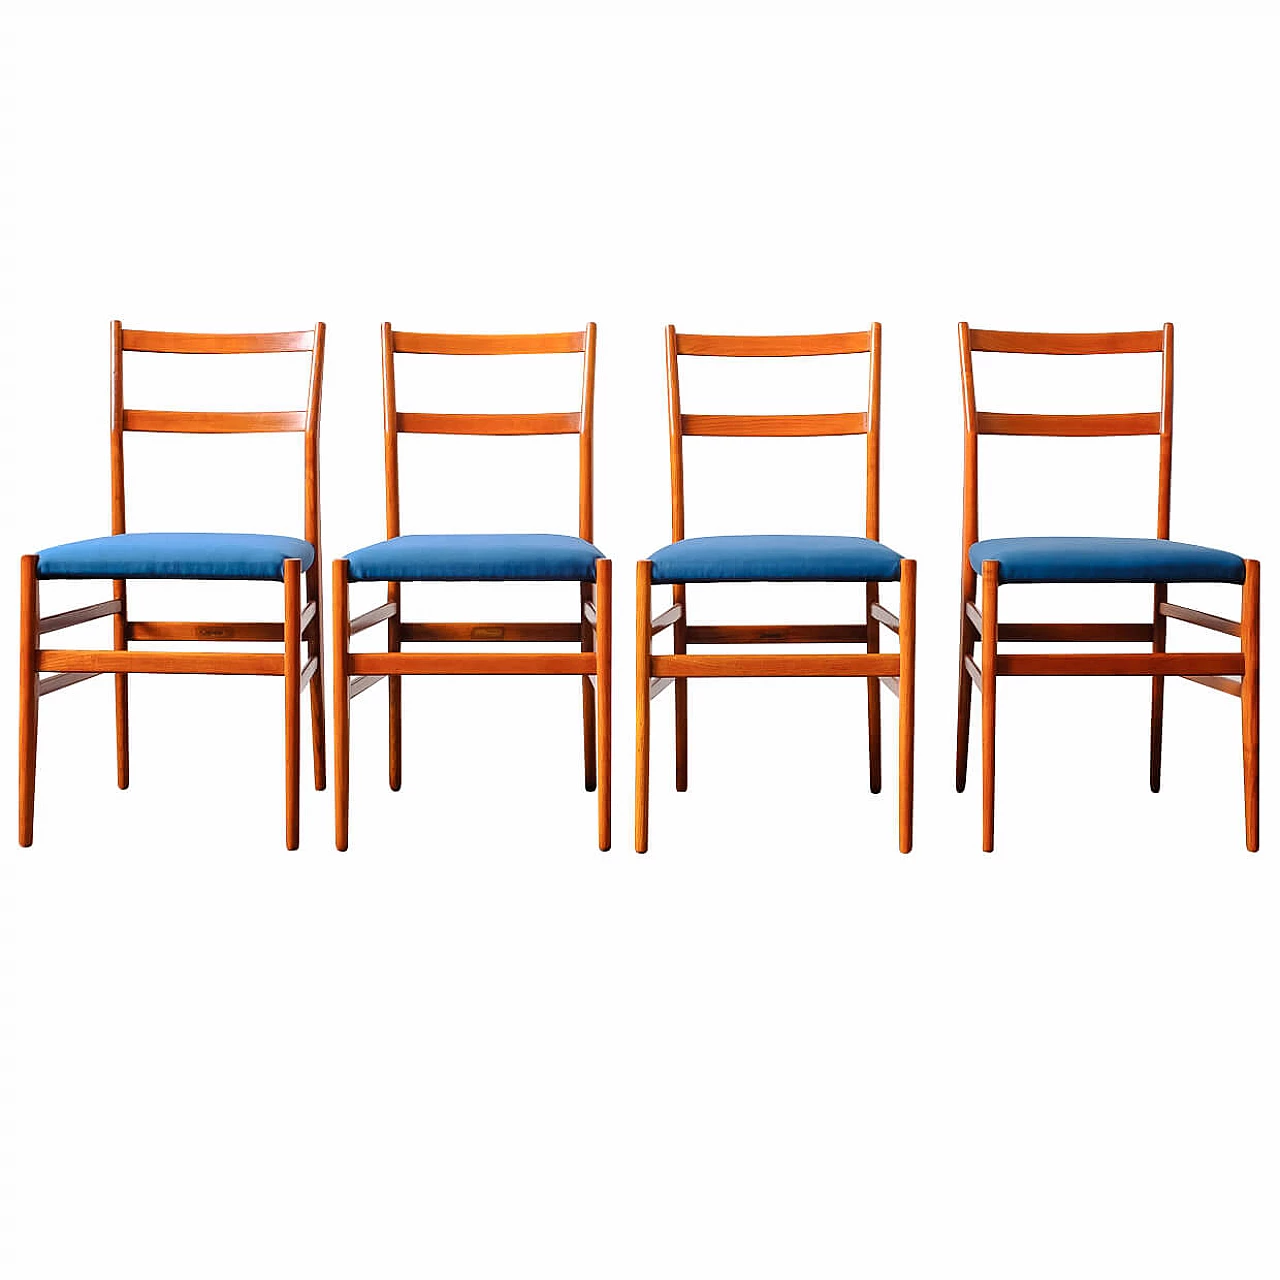 4 Leggera chairs by Gio Ponti for Cassina, 1950s 1234469